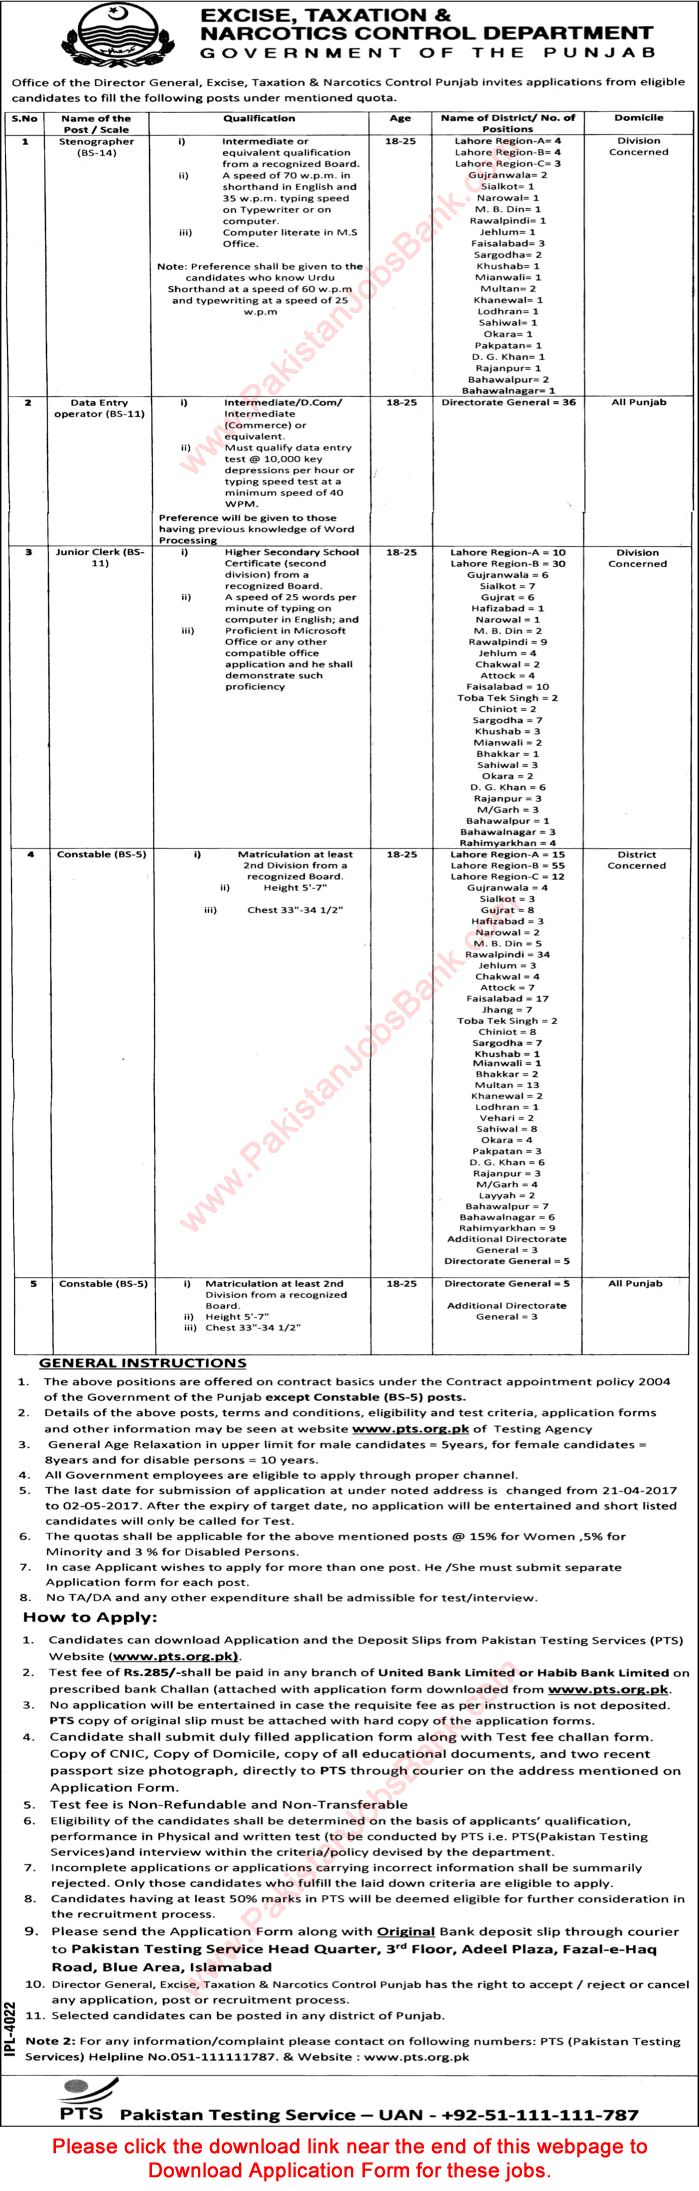 Excise and Taxation Department Punjab Jobs April 2017 PTS Application Form Download Latest / New